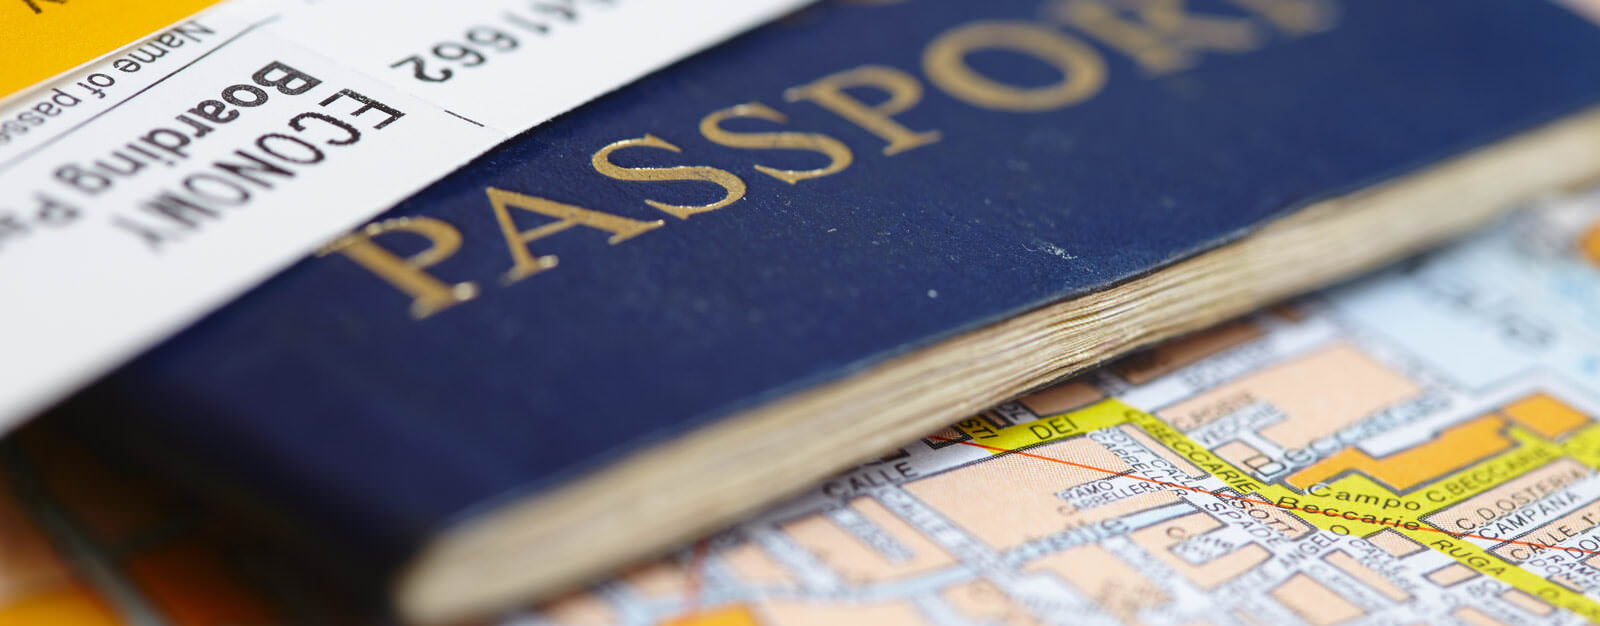 Get your passport fast with Passport Health's expedited services.